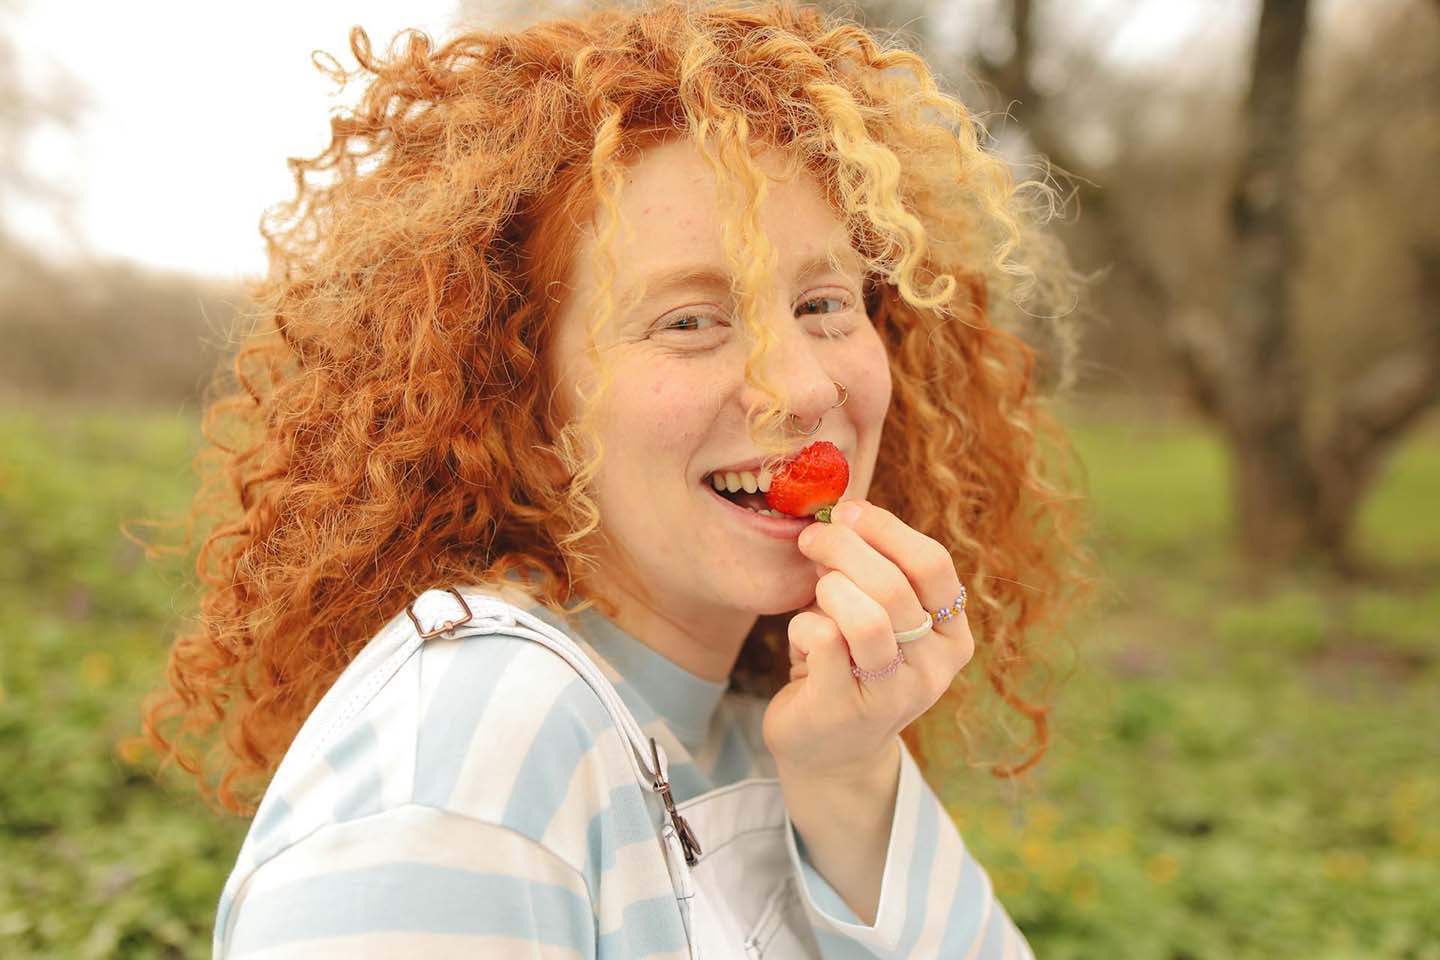 an adorable woman with curly red hair happily eating a strawberry